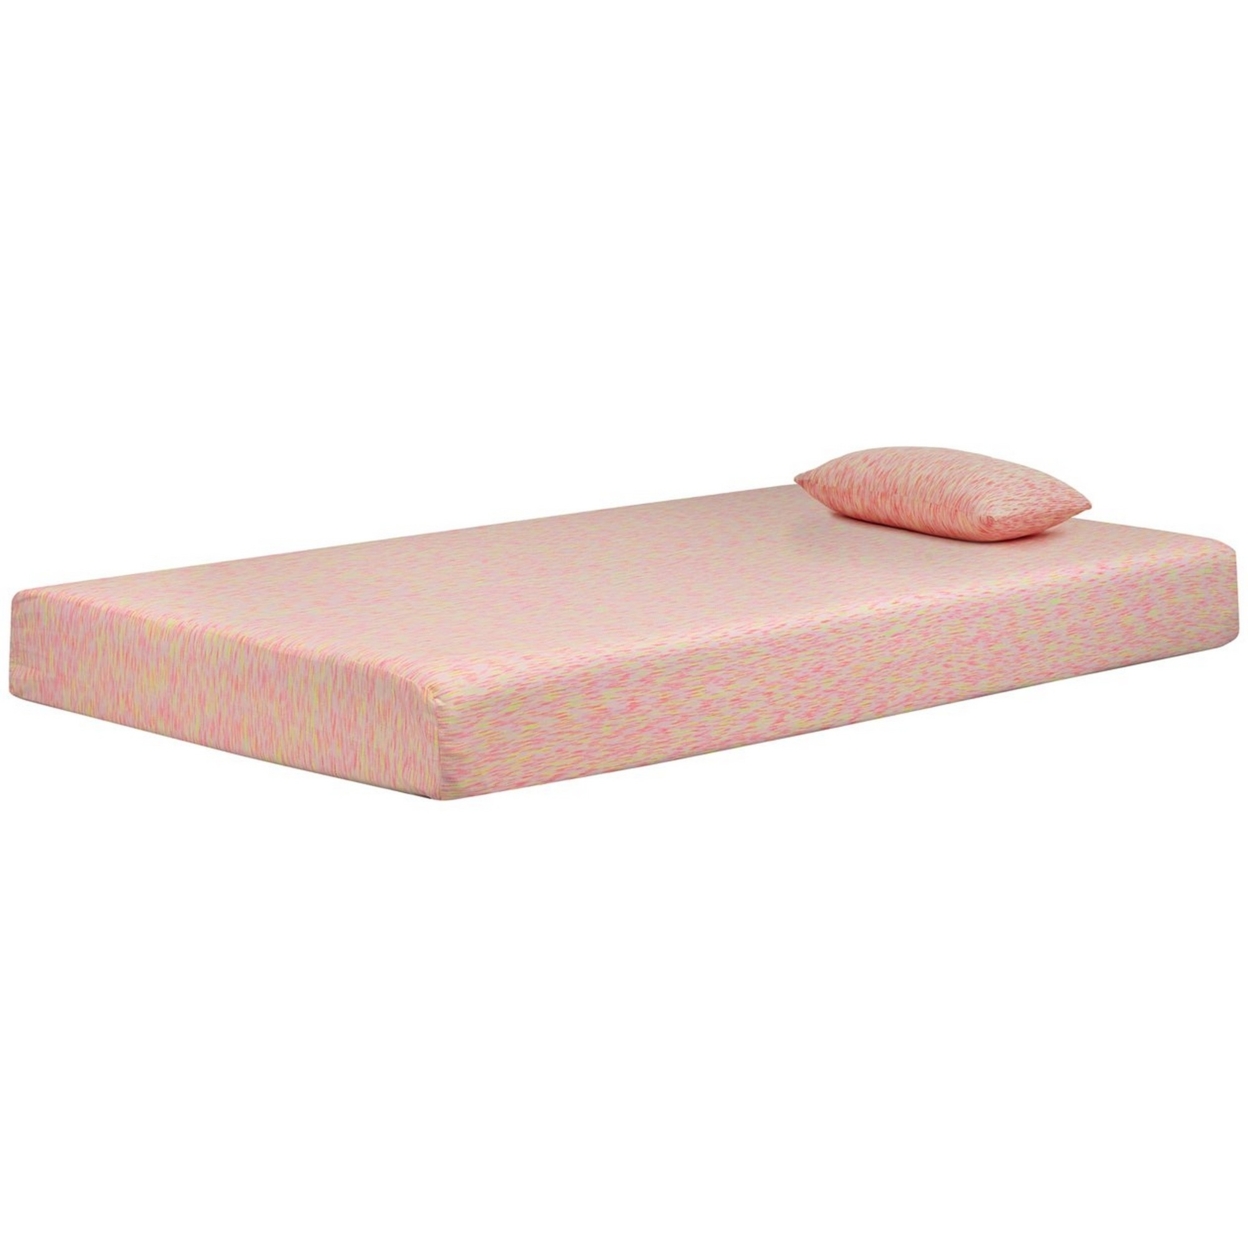 Twin Size Mattress With Hyperstretch Knit Cover And Pillow, Pink- Saltoro Sherpi